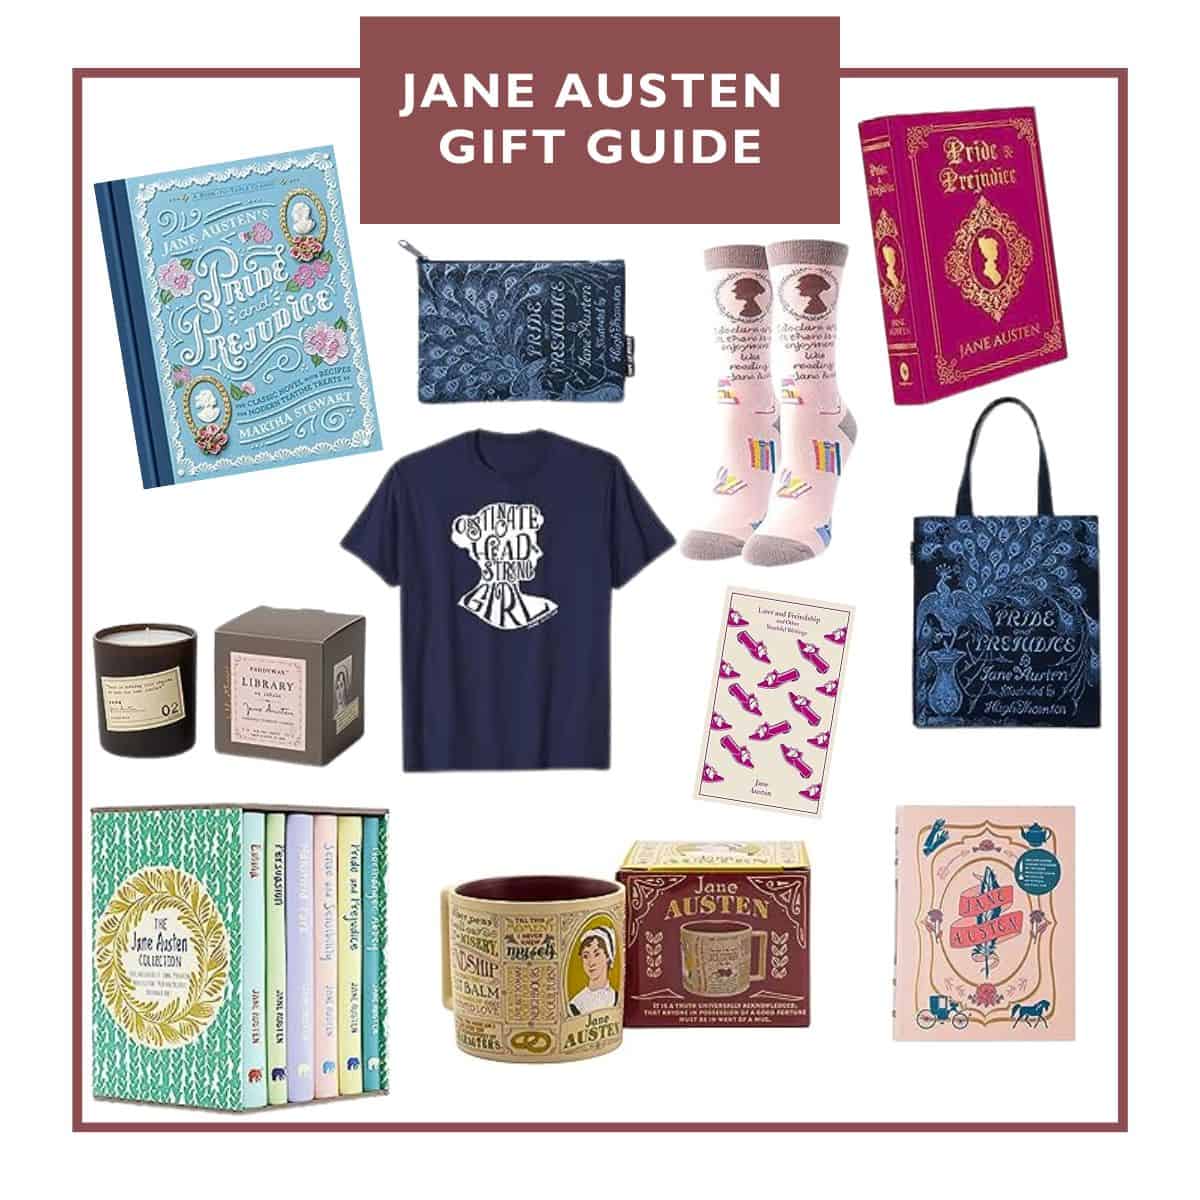 15 Perfect Jane Austen Gifts on Amazon She’ll Love